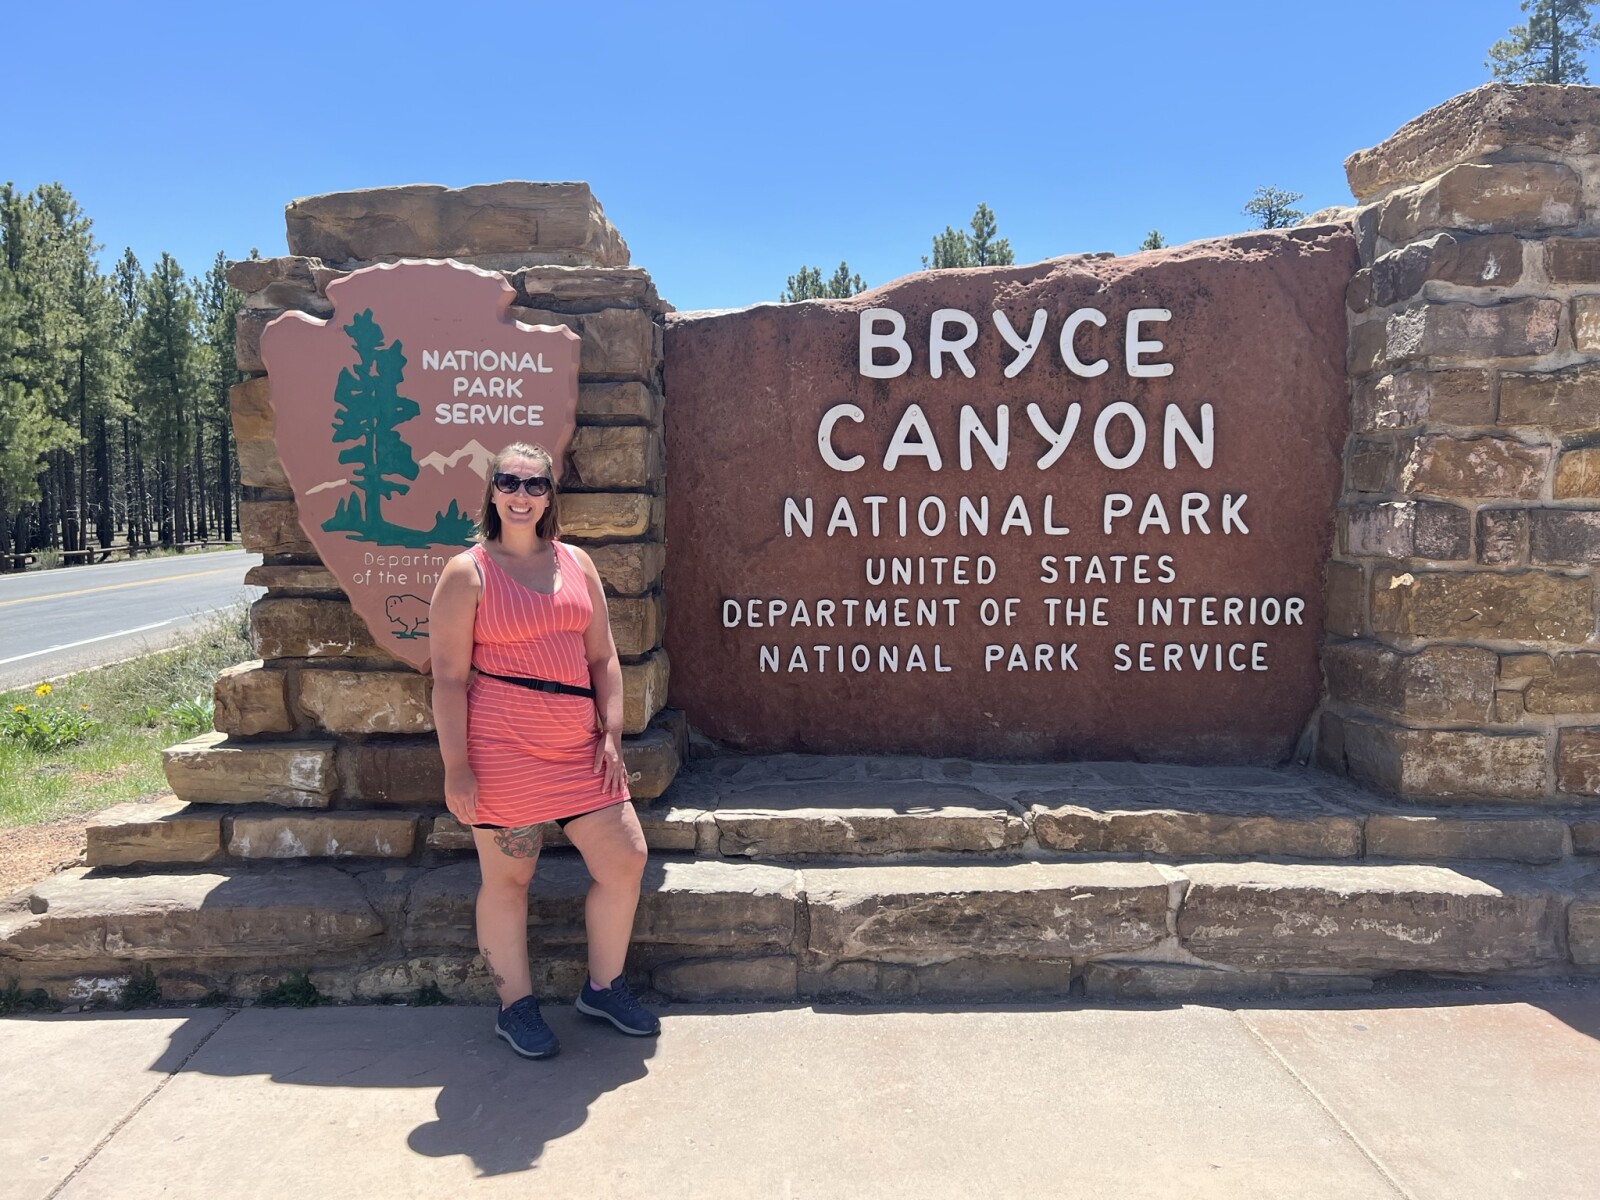 Bryce Canyon National Park - what no one tells you